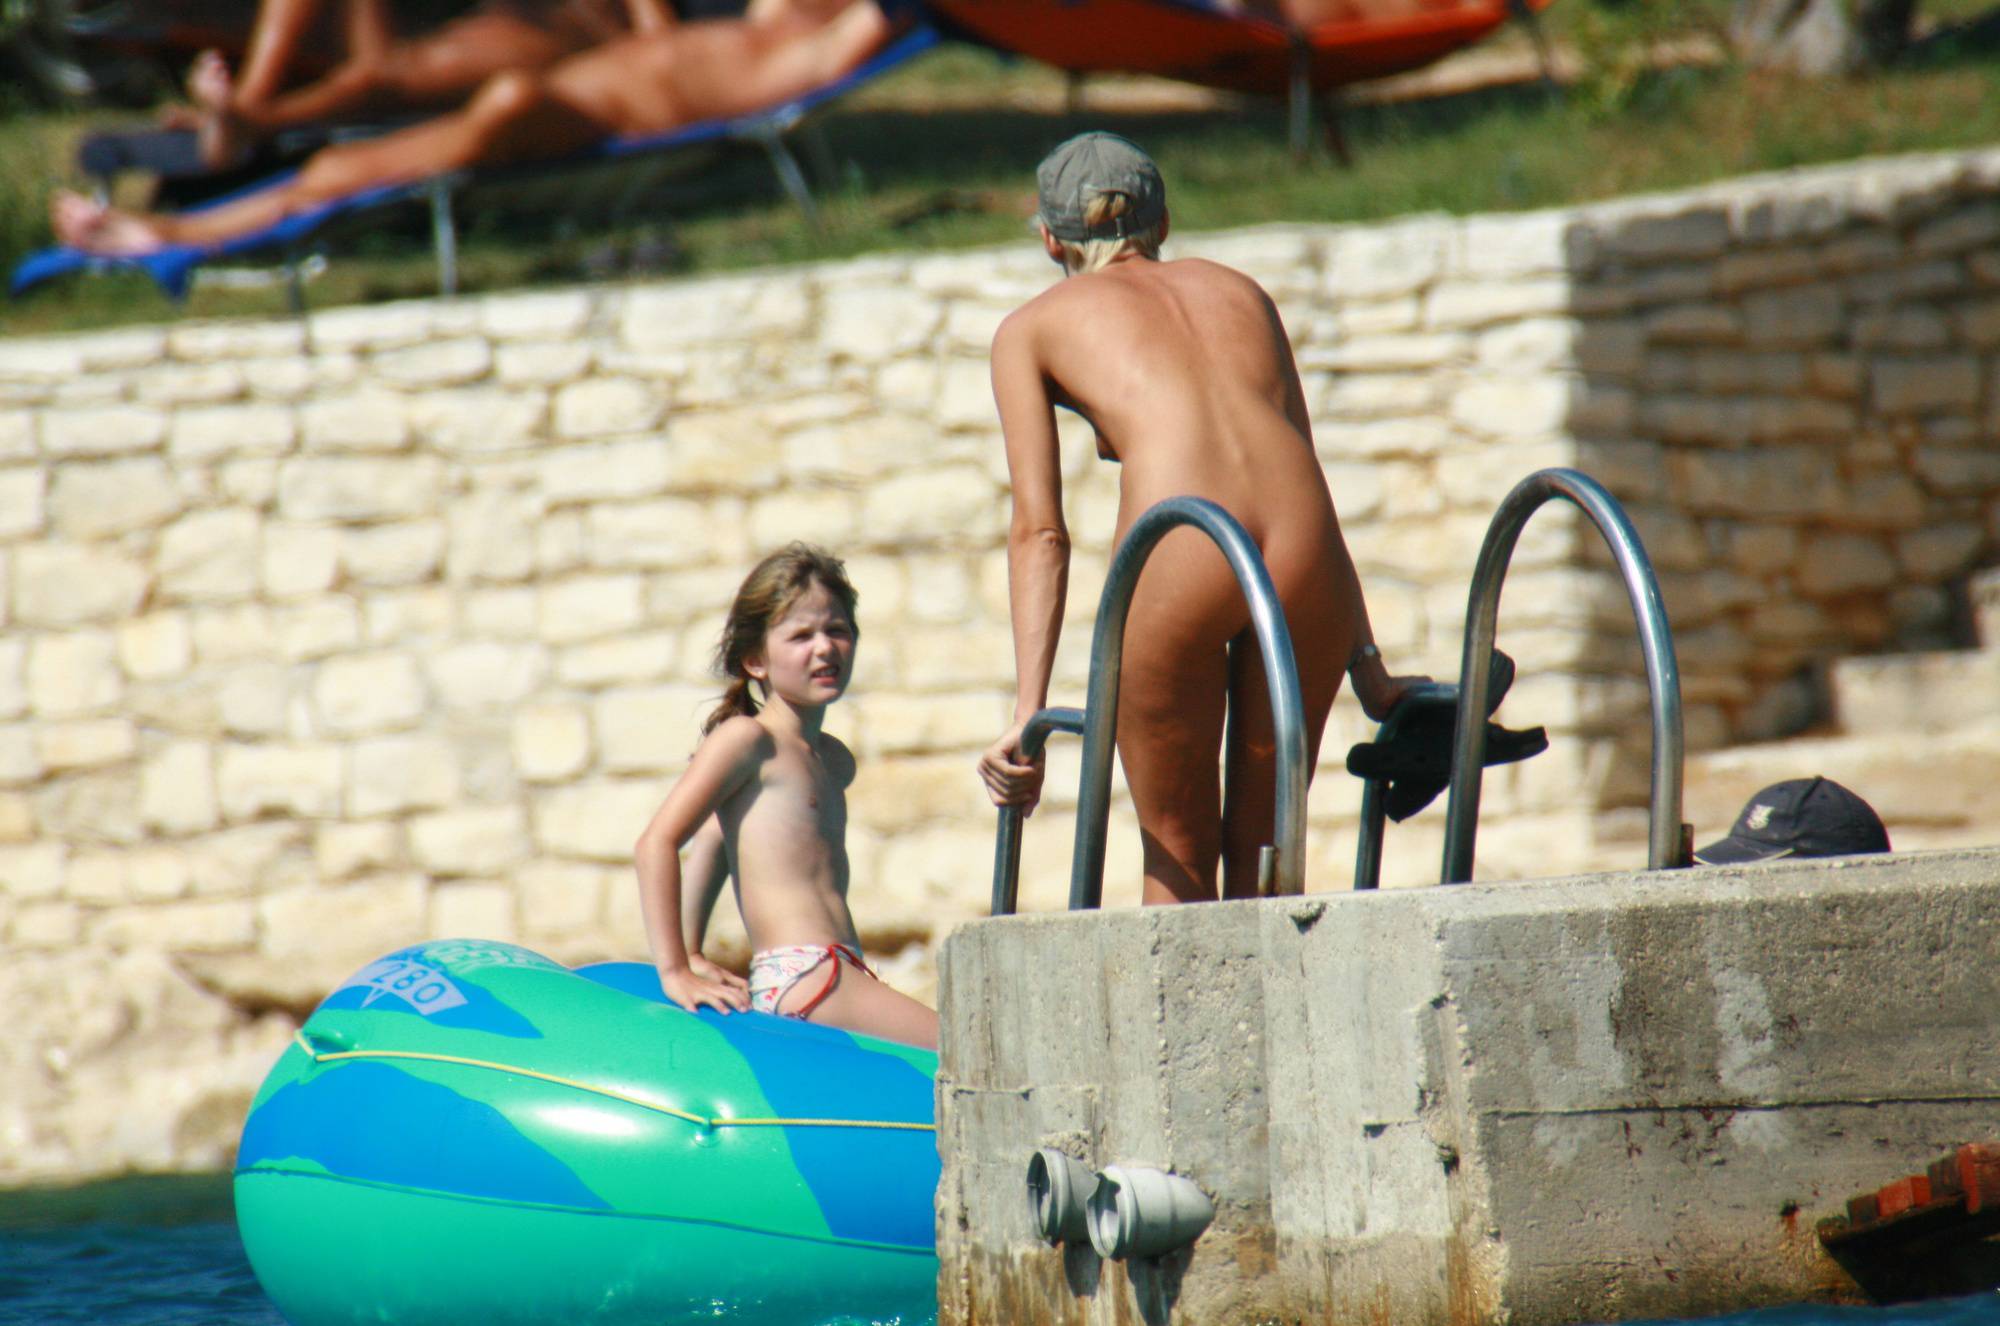 Naturist Photos Mother Daughter Boating - 1